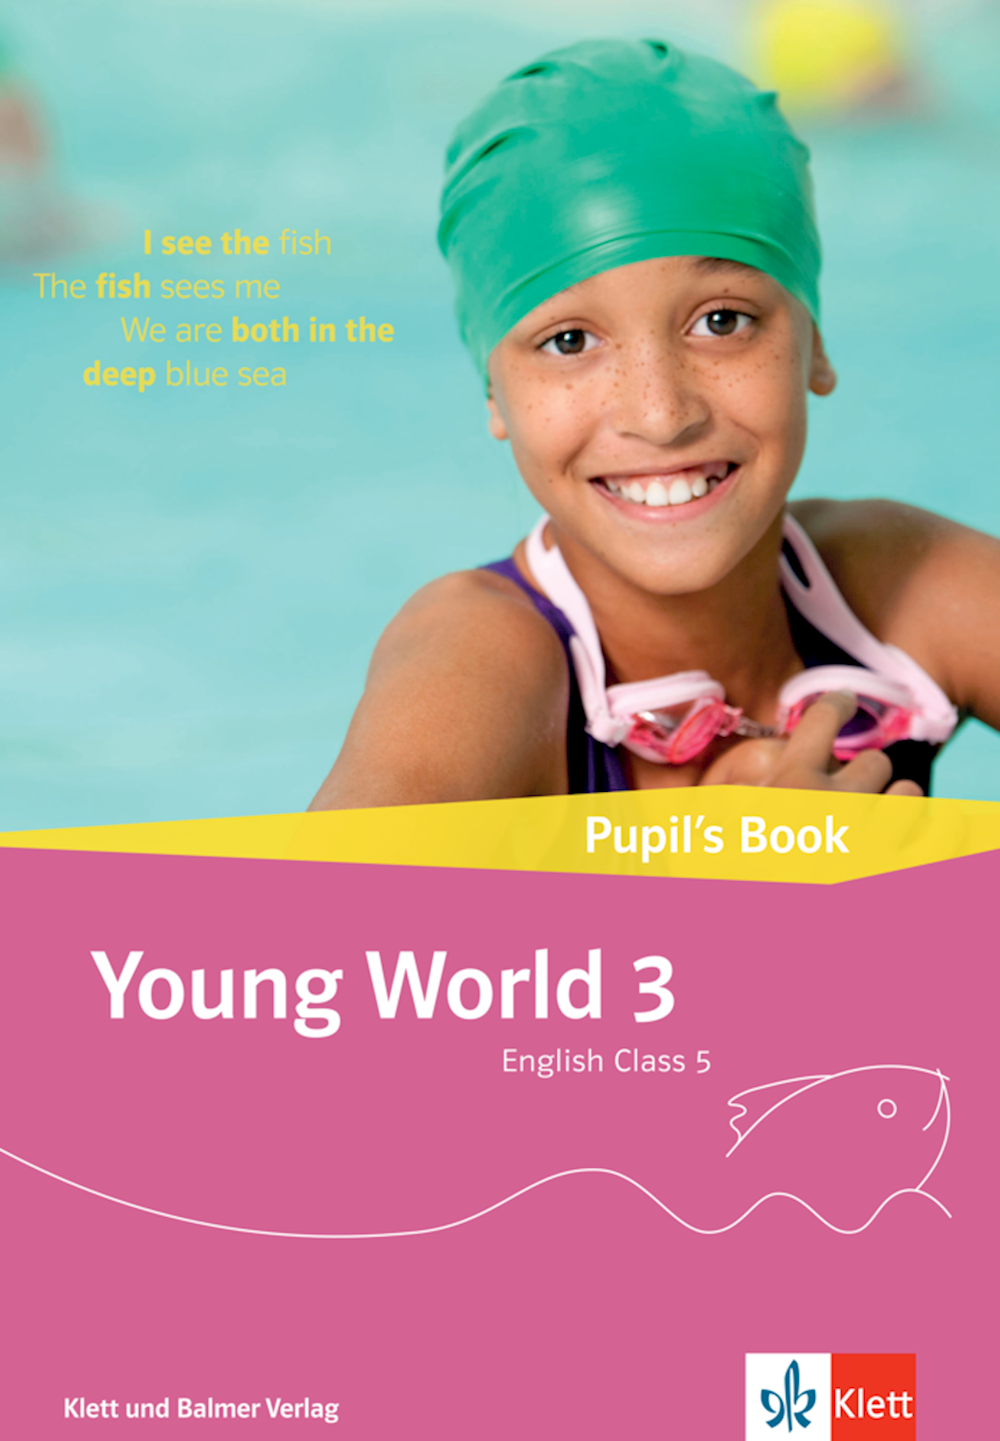 Young World 3 Pupil's Book English Class 5